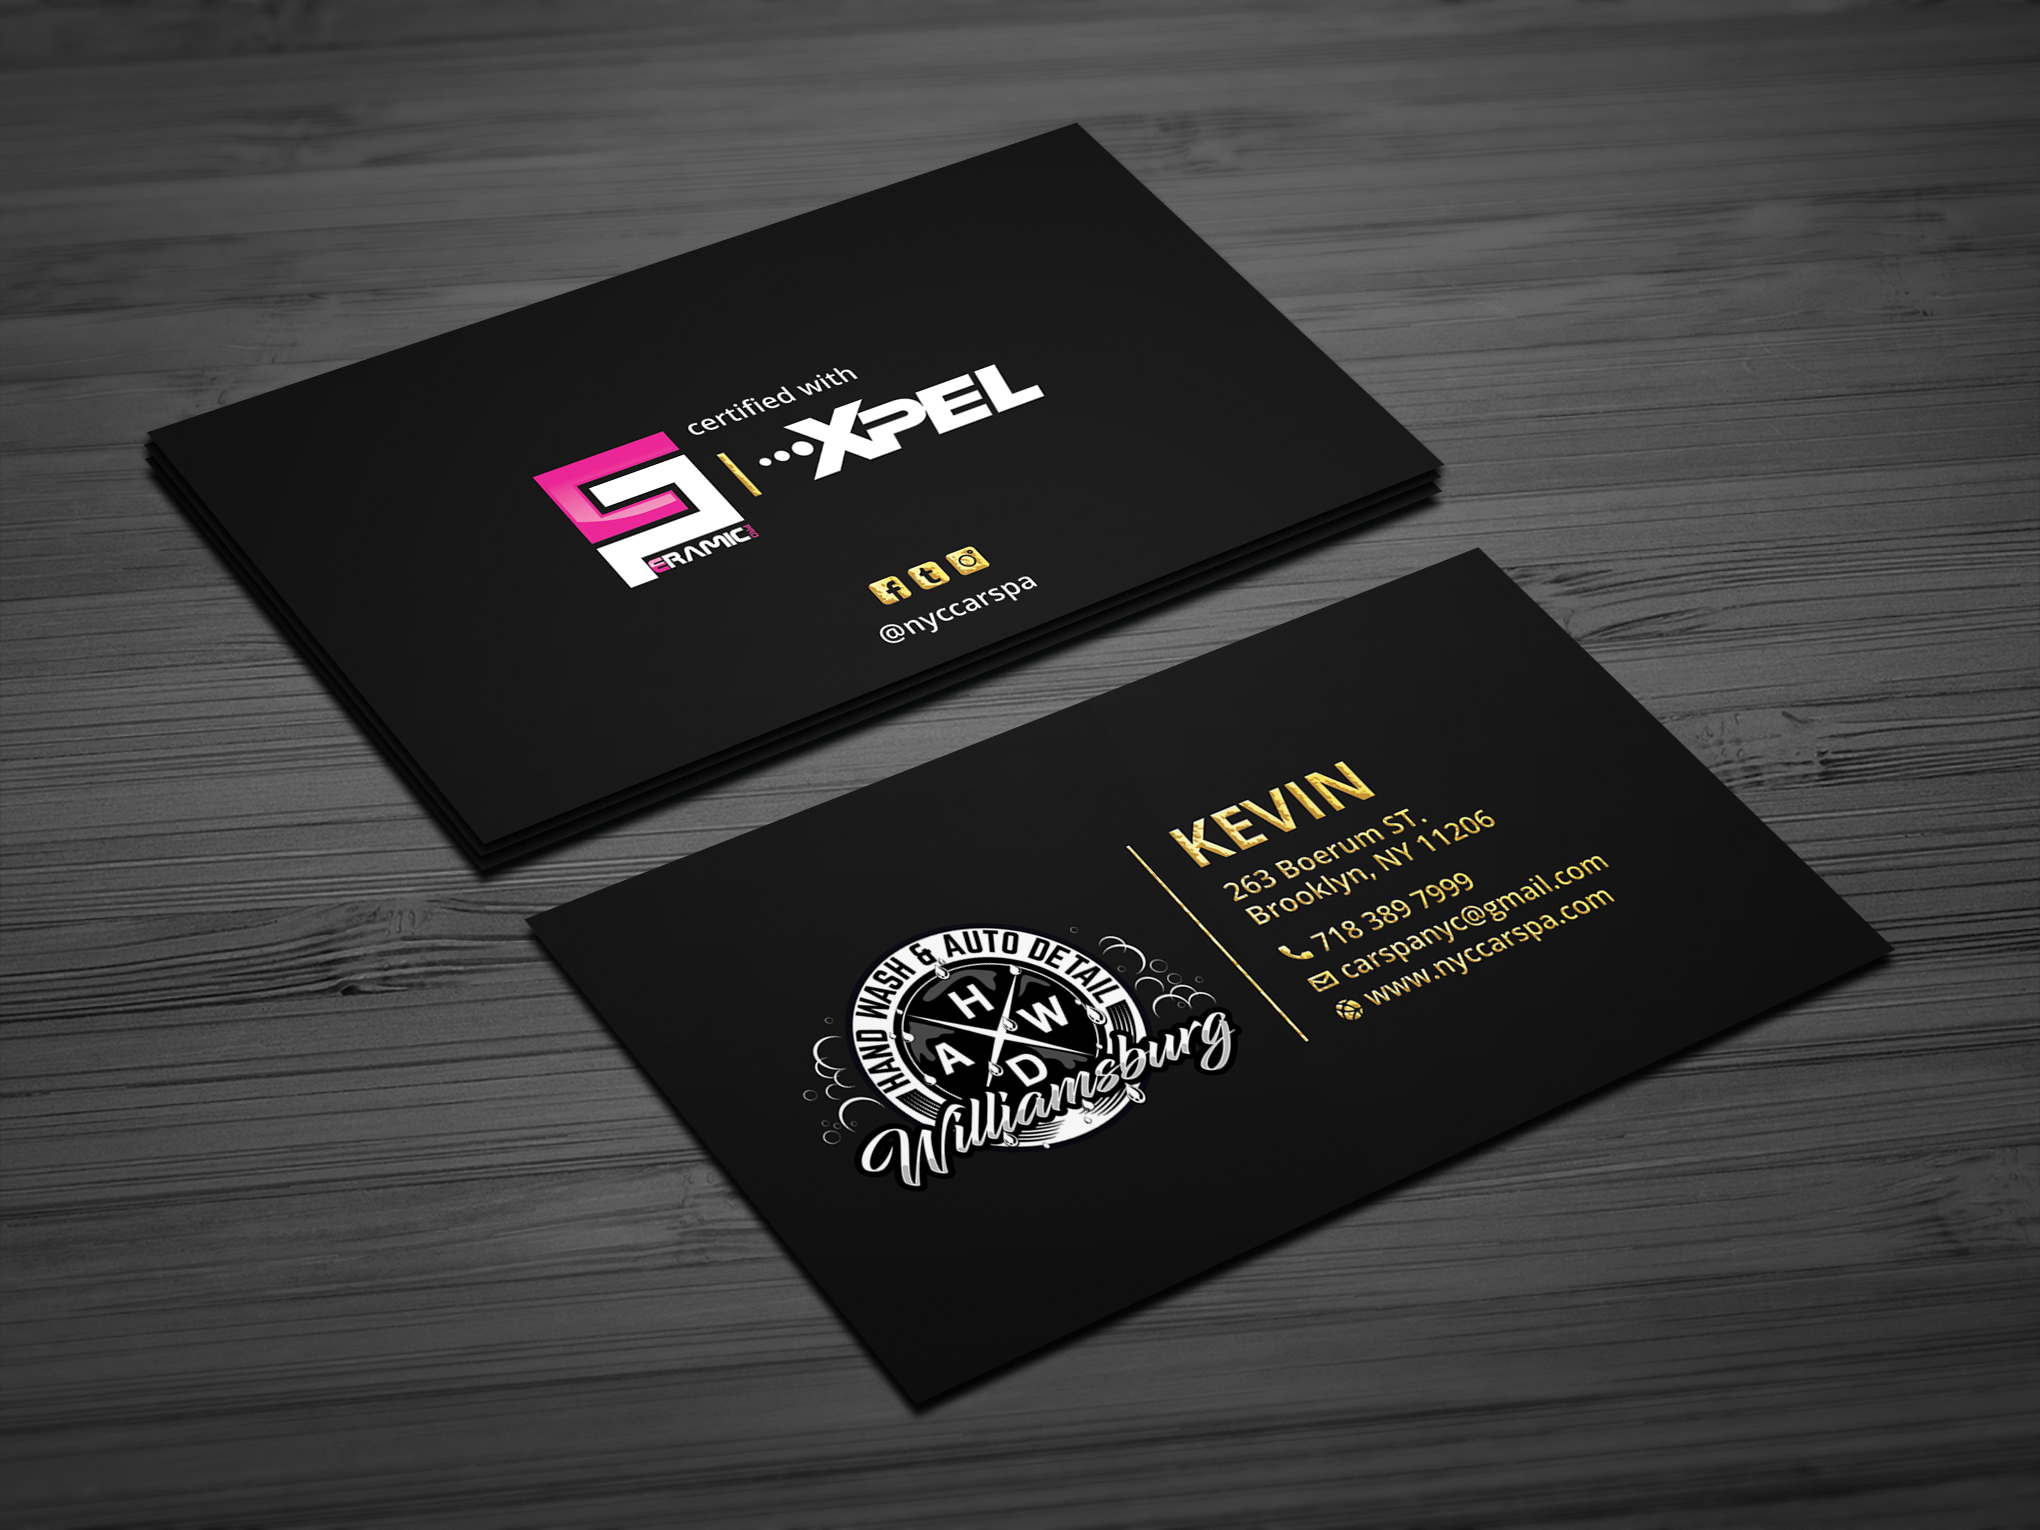 mobile detail business cards 3